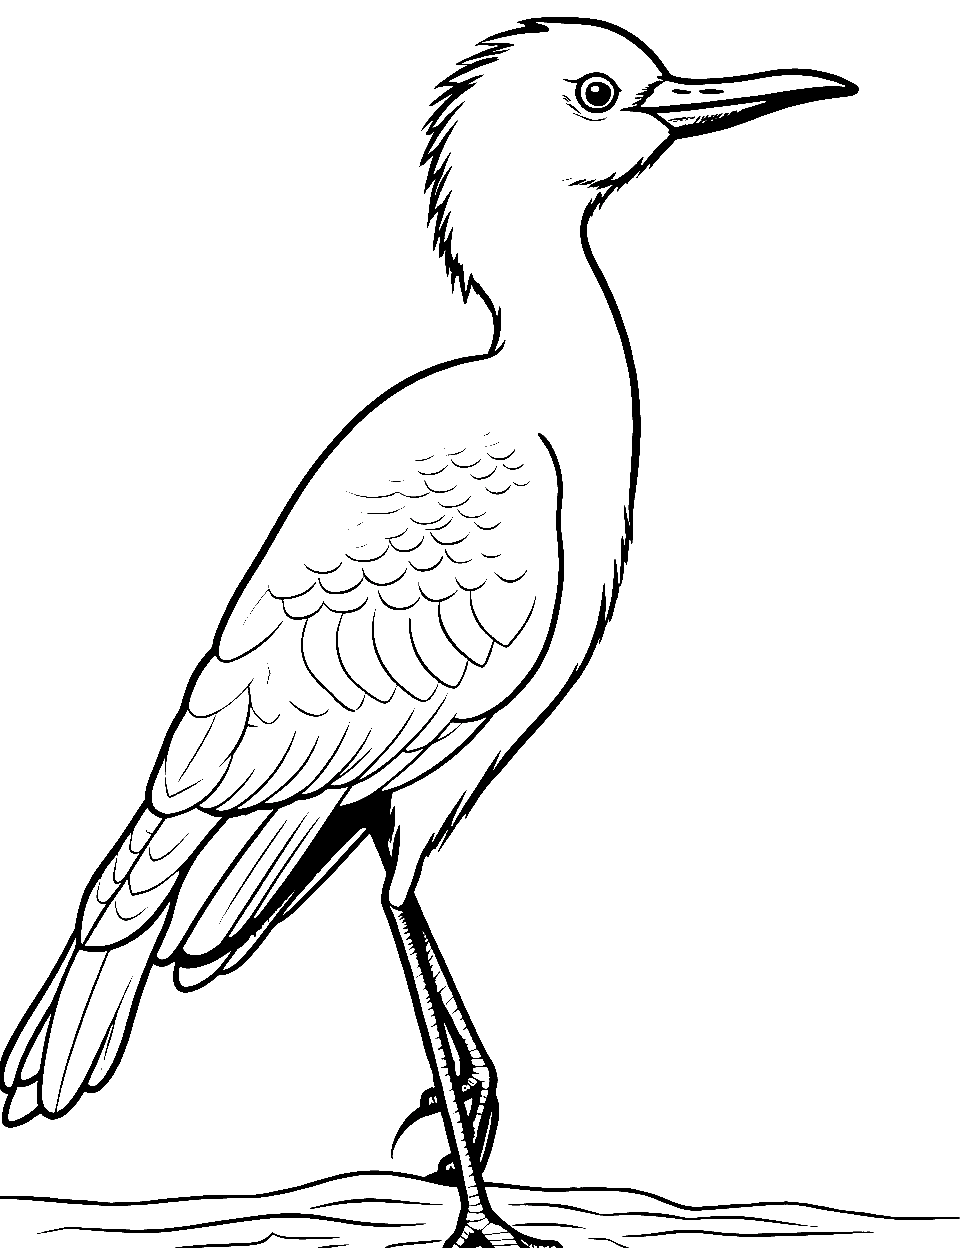 Crane's Evening Stroll Coloring Page - A crane taking a leisurely stroll in the evening.